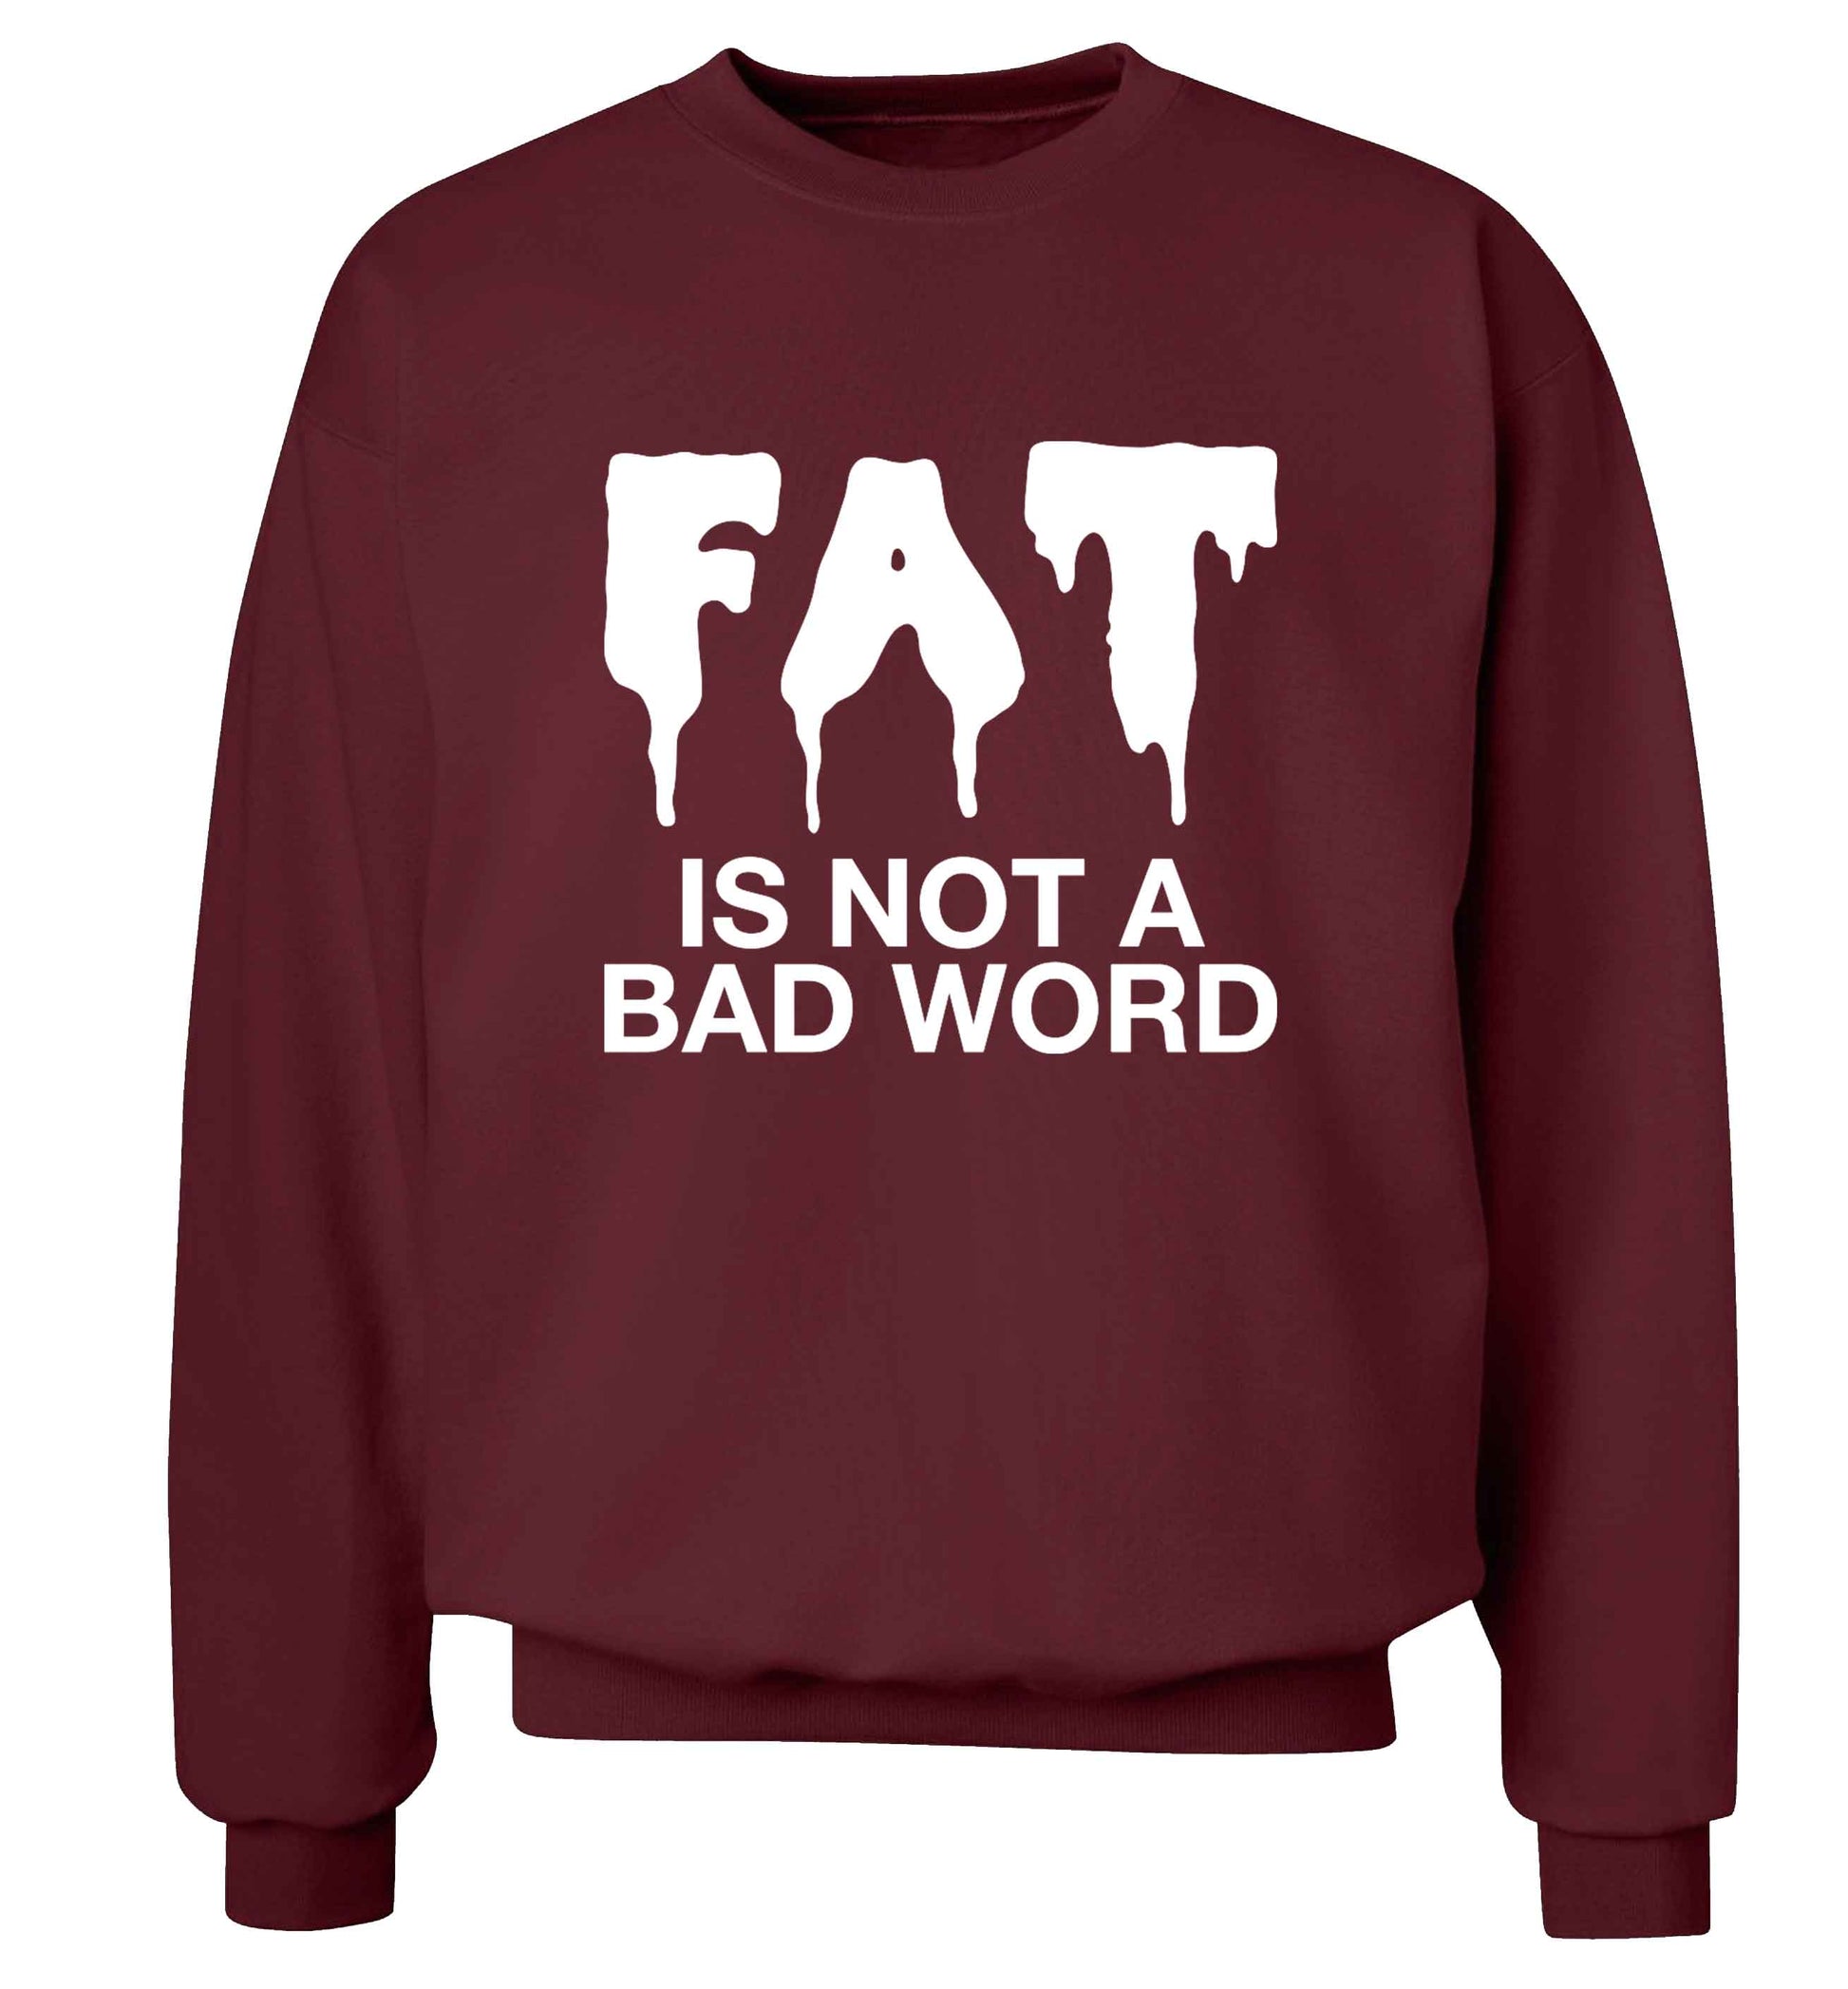 Fat is not a bad word adult's unisex maroon sweater 2XL